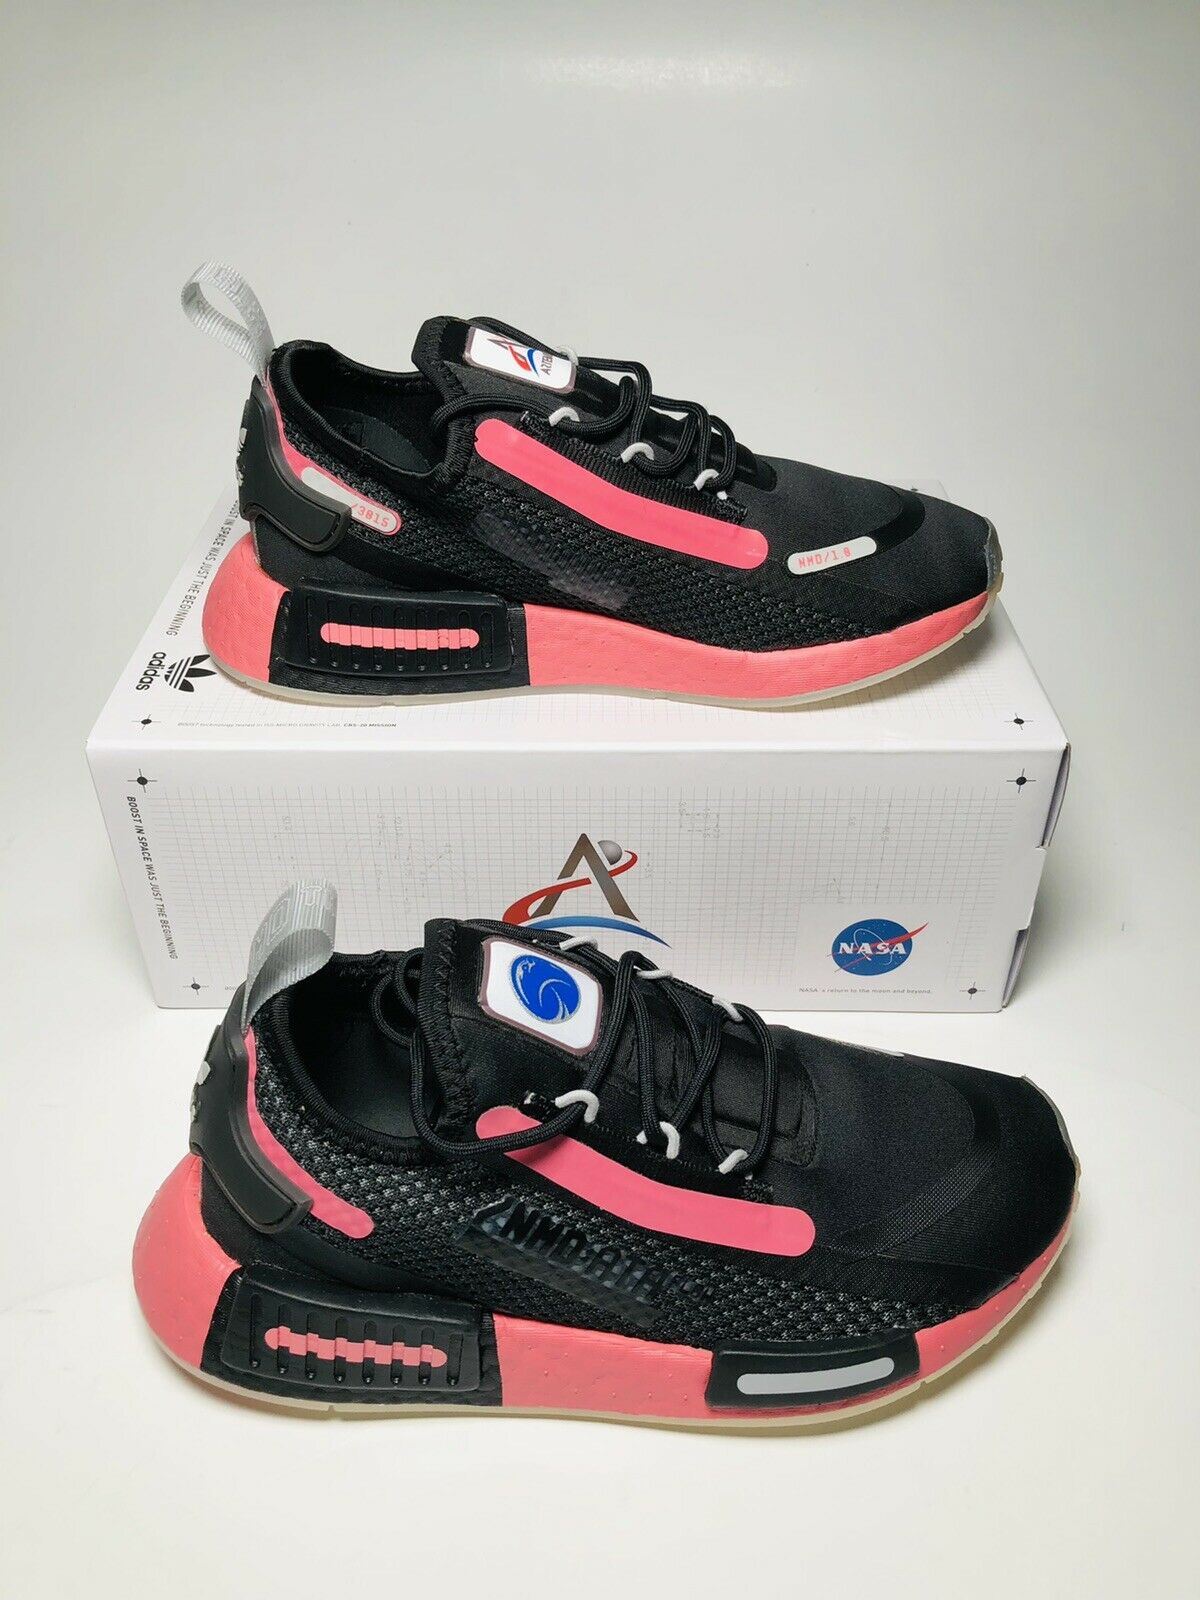 Adidas Women's NMD R1 x NASA Spectoo Shoes Black Pink Casual Size 6 NEW FZ3207